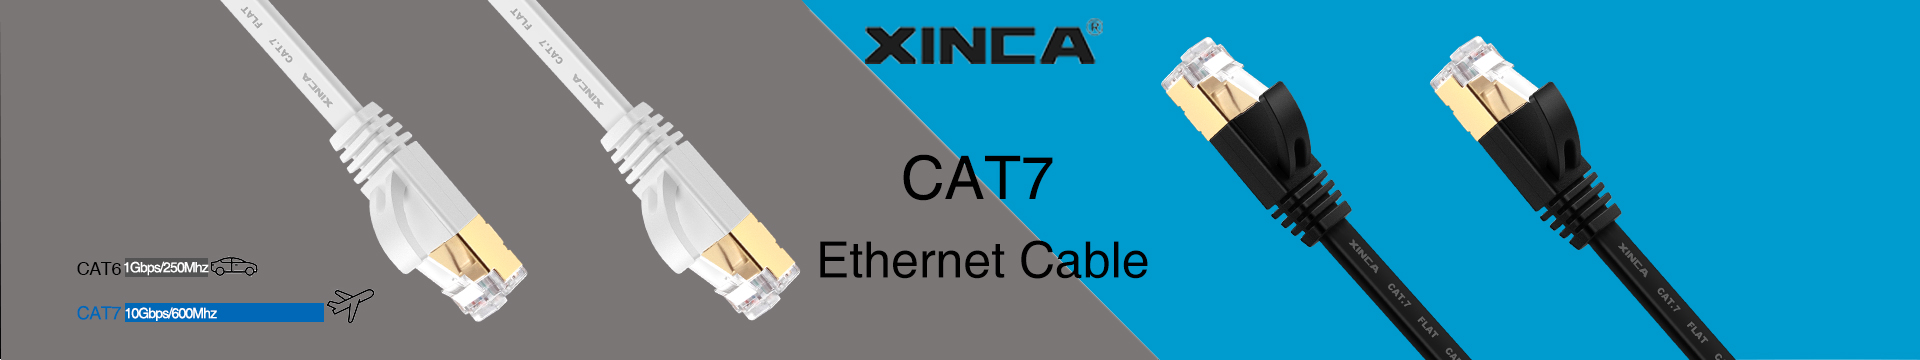 XINCA Cat7 Ethernet Cable Extra Long Lnternet Network Flat Patch Cord 15ft  White With 5 Cable Clips Rj45 Connectors10 Gbps 600MHz Connector For Modems  routers LAN Computers Cable High Speed Distri 